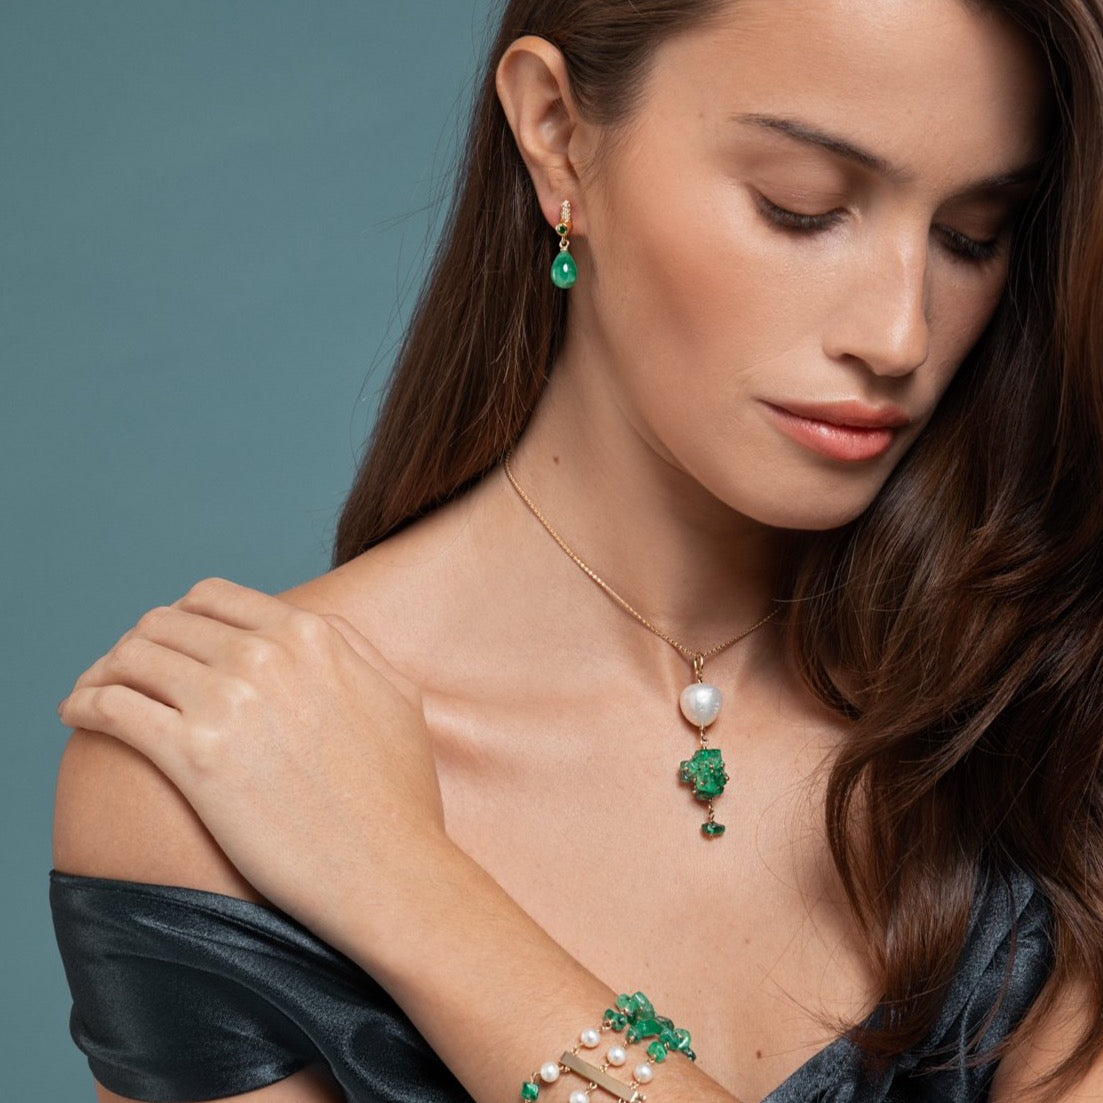 Lilian wearing the Drop Emerald Earrings, Emerald and Pearl Bracelet and the Emerald and Baroque Pearl Necklace by McFarlane Fine Jewellery